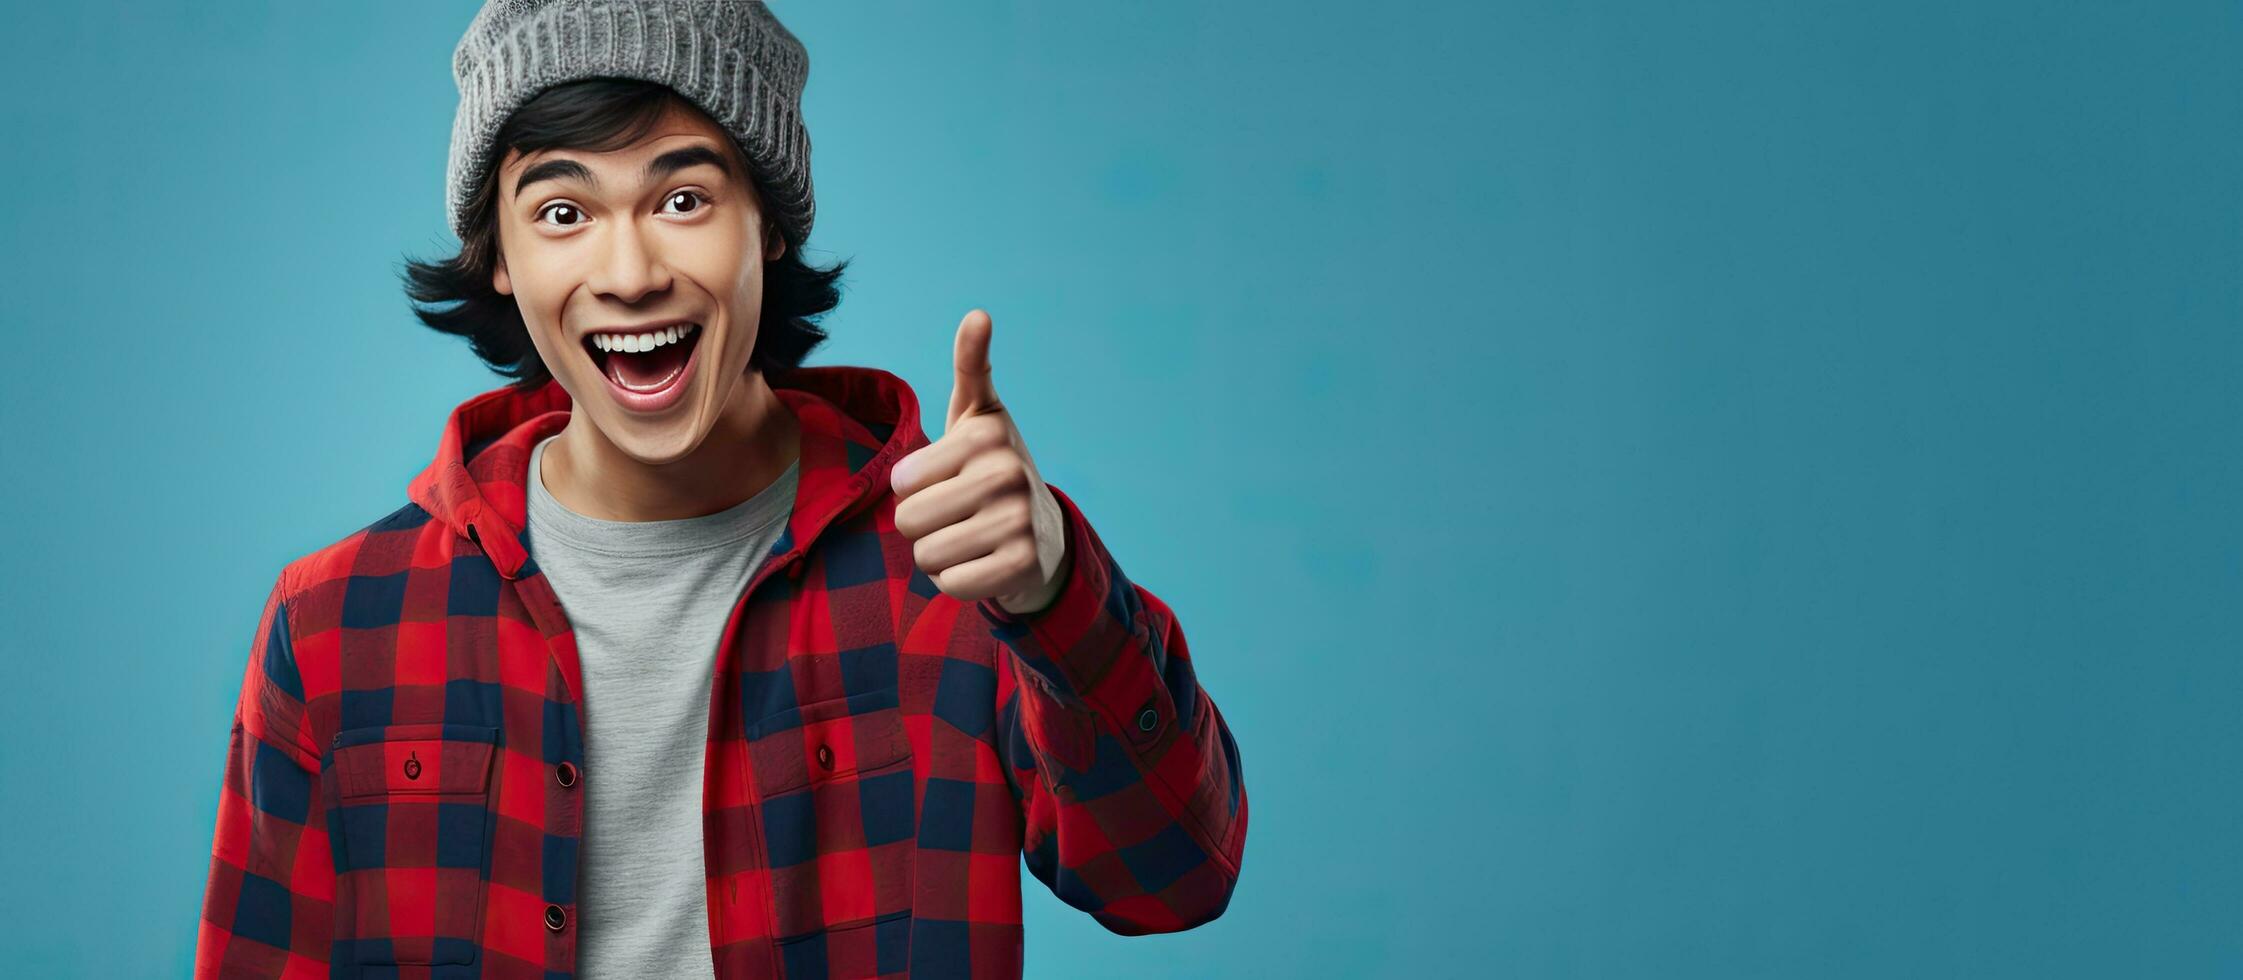 Asian man in beanie hat and flannel shirt energetically pointing down on blue background photo